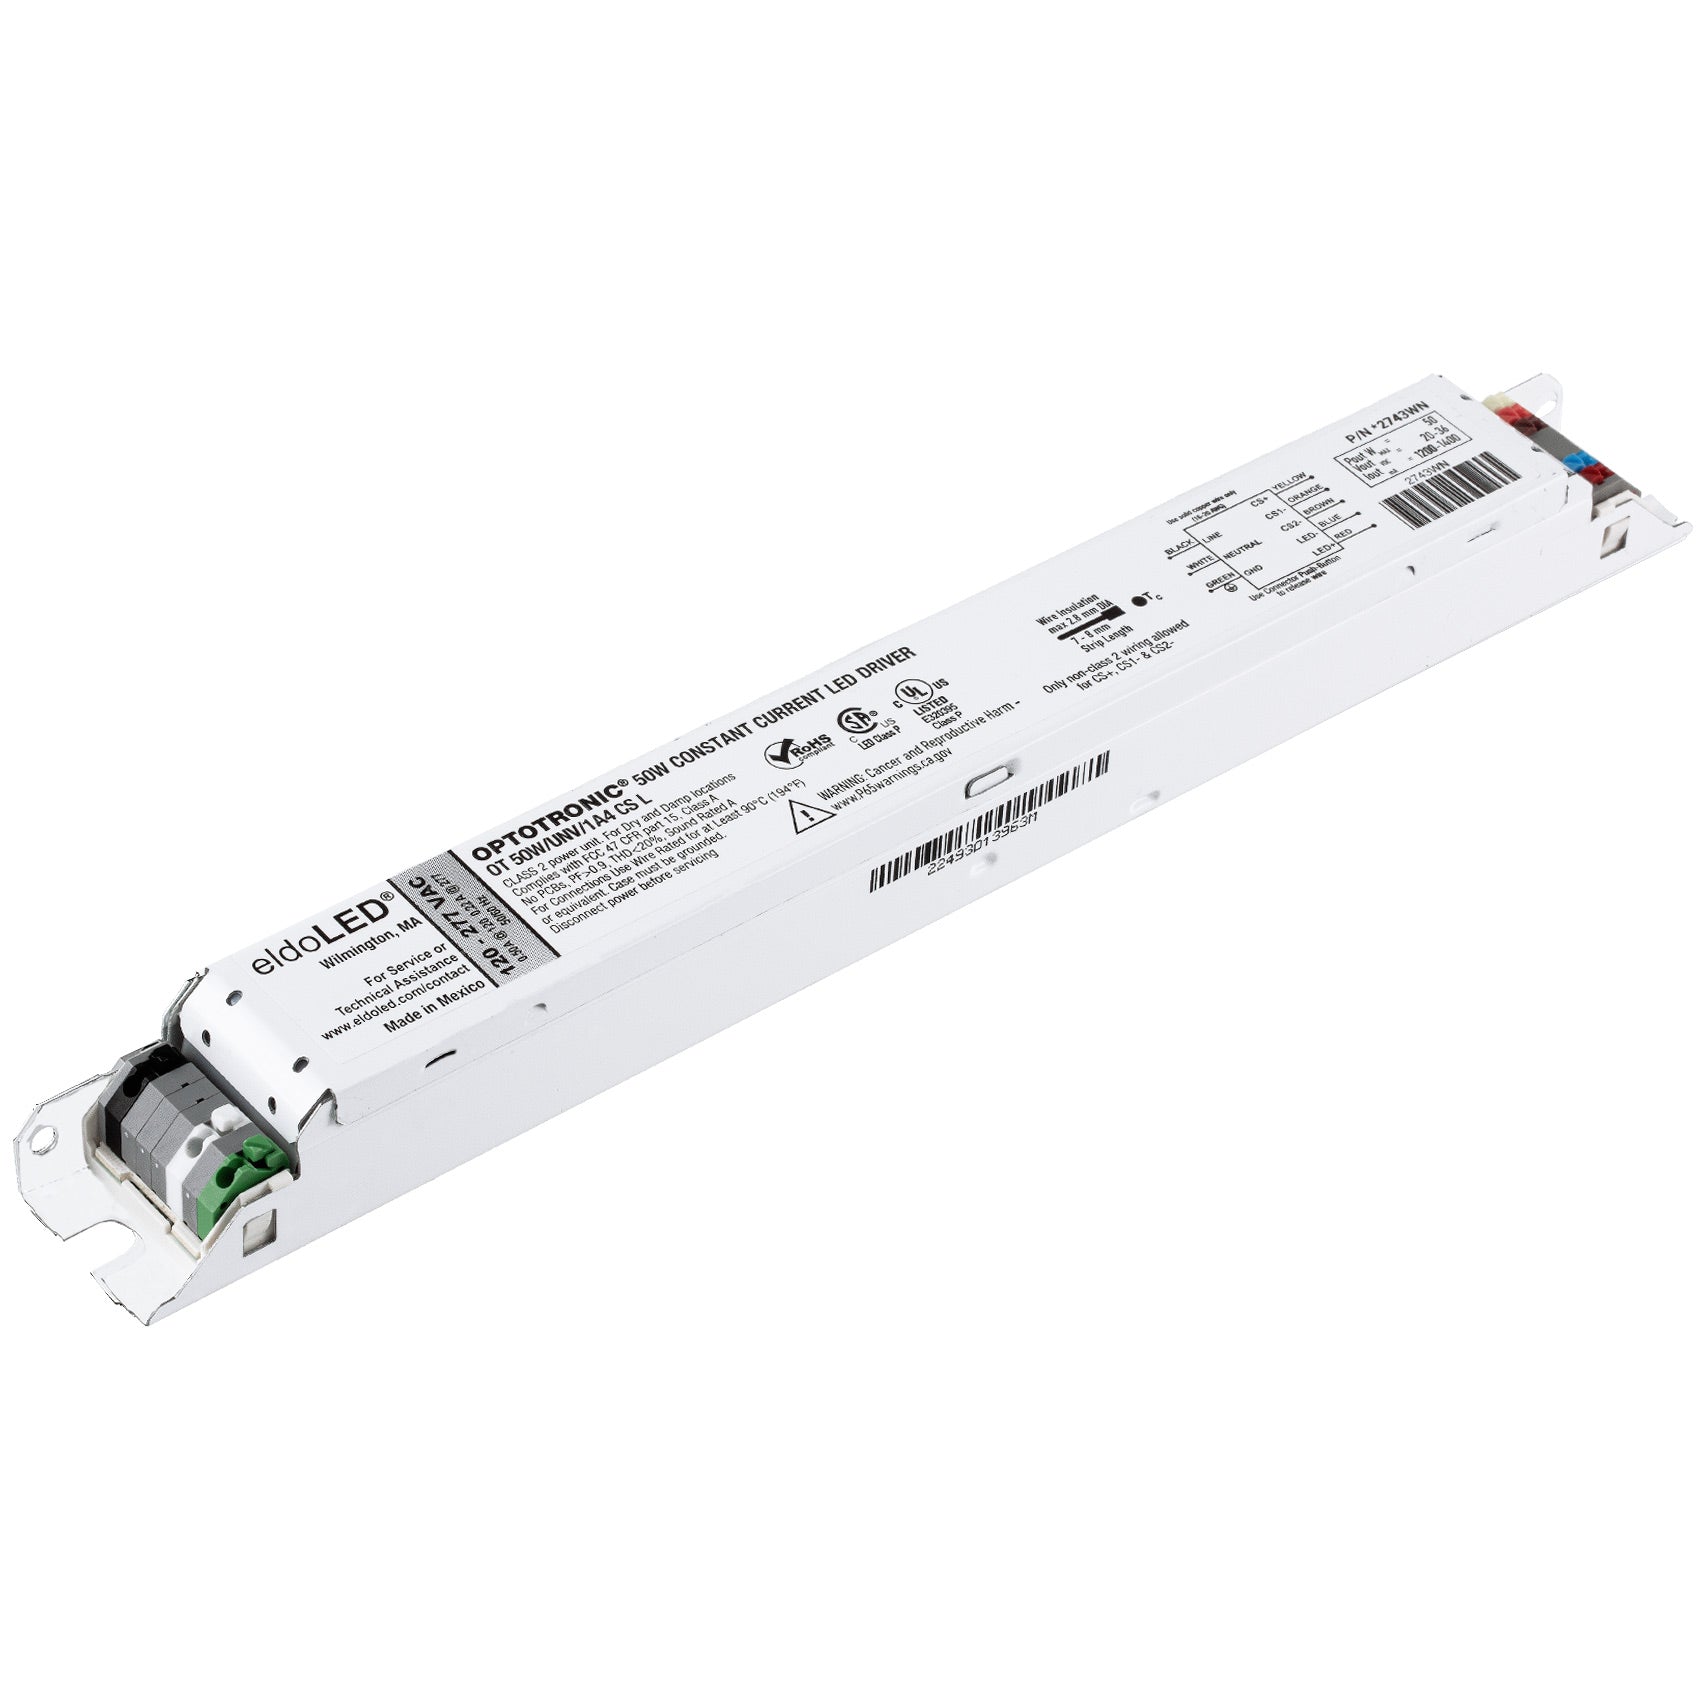 Fabel Overtekenen Spektakel eldoLED *2743WN OPTOTRONIC 50W Constant Current Non-Dimmable LED Drive –  sirs-e.us